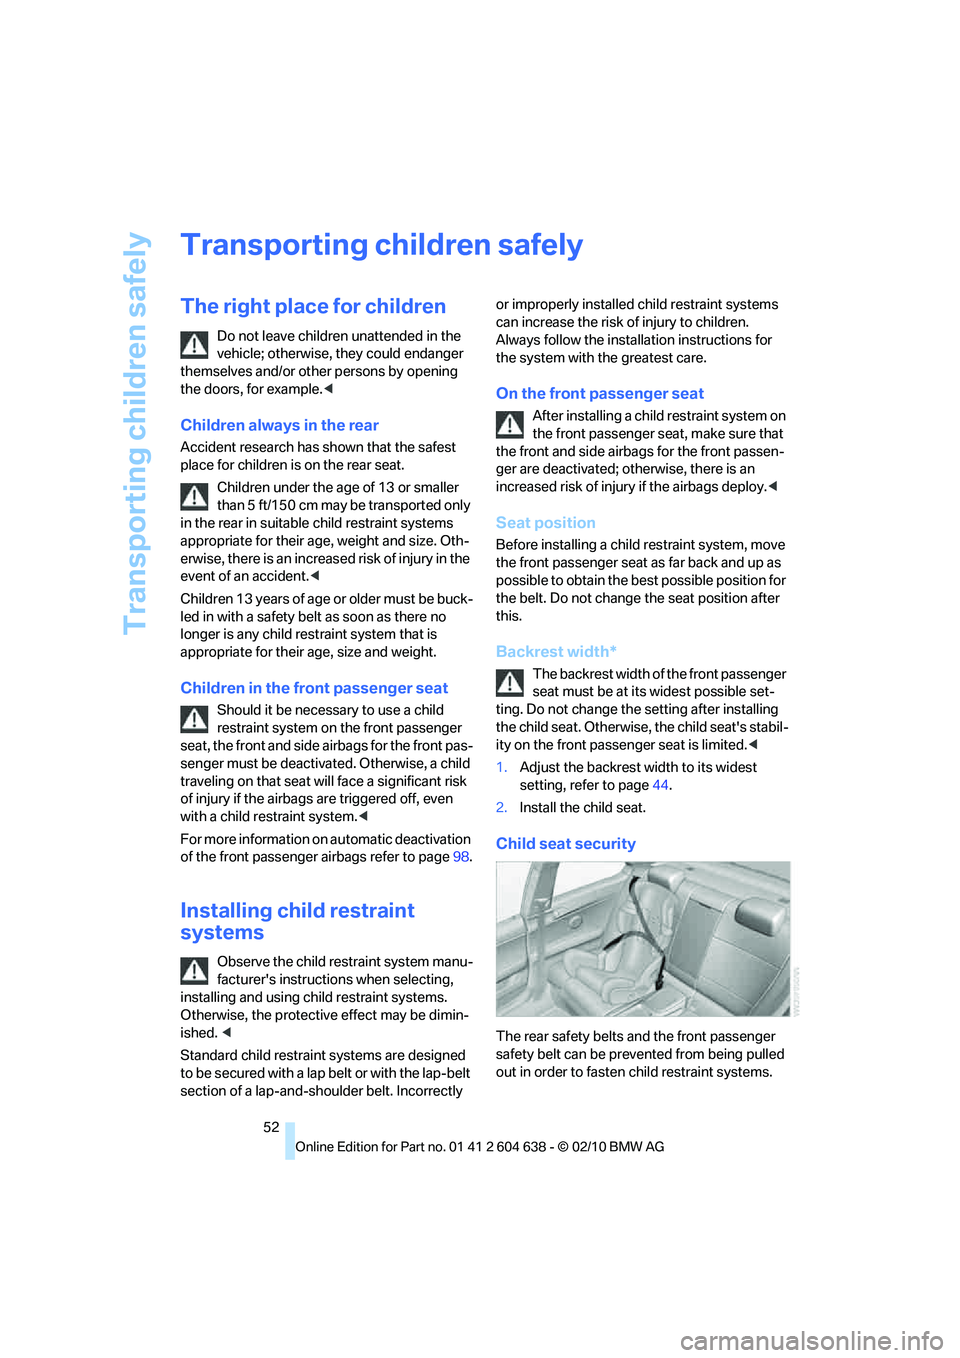 BMW M3 CONVERTIBLE 2011  Owners Manual Transporting children safely
52
Transporting children safely
The right place for children
Do not leave children unattended in the 
vehicle; otherwise, they could endanger 
themselves and/or other pers